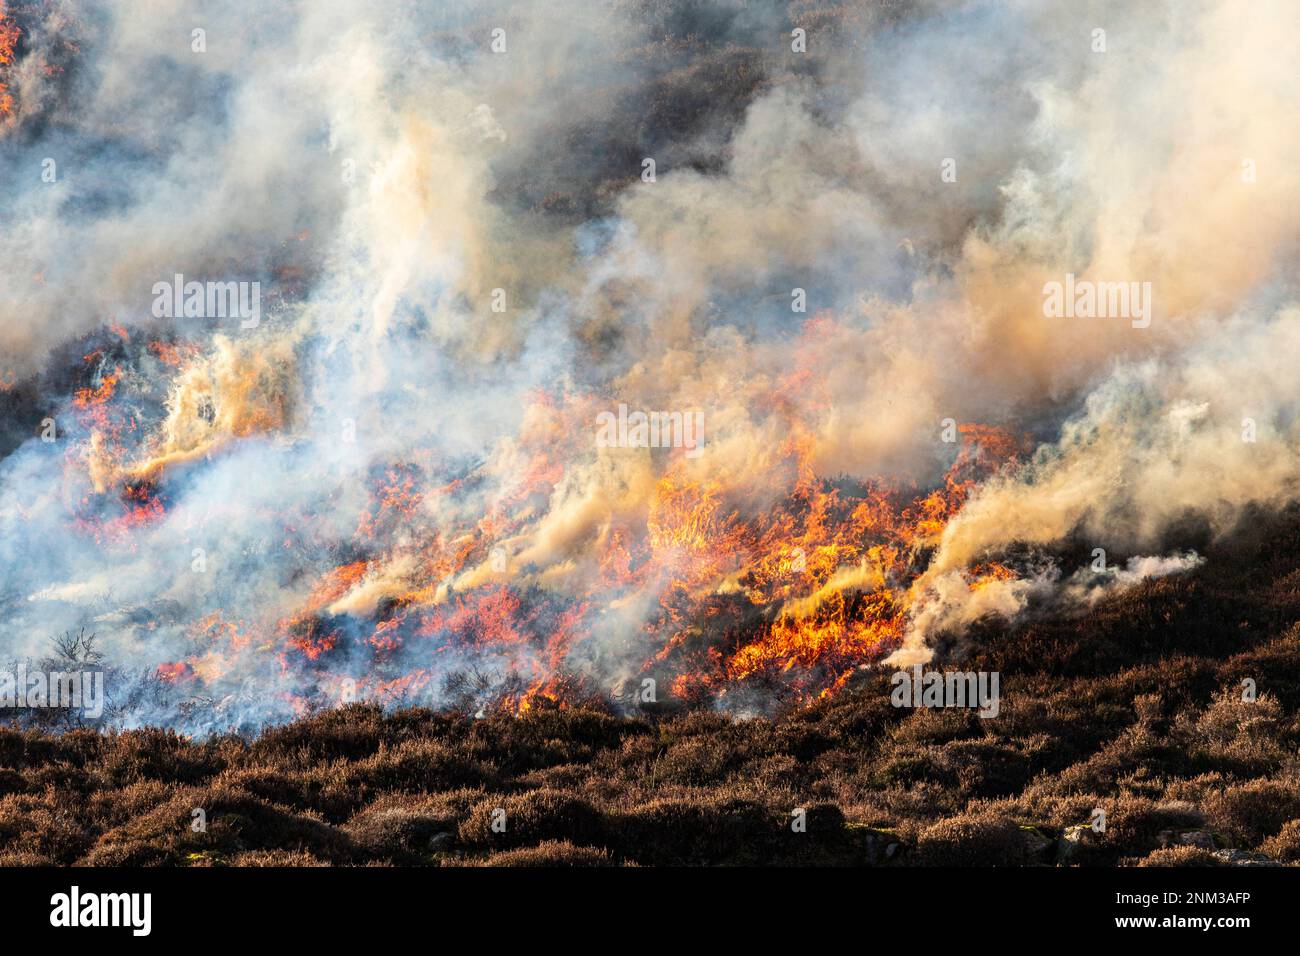 The controlled burning of heather moorland (swailing or muirburn) on the slopes of Sgor Mor south of Braemar, Aberdeenshire, Scotland UK Stock Photo